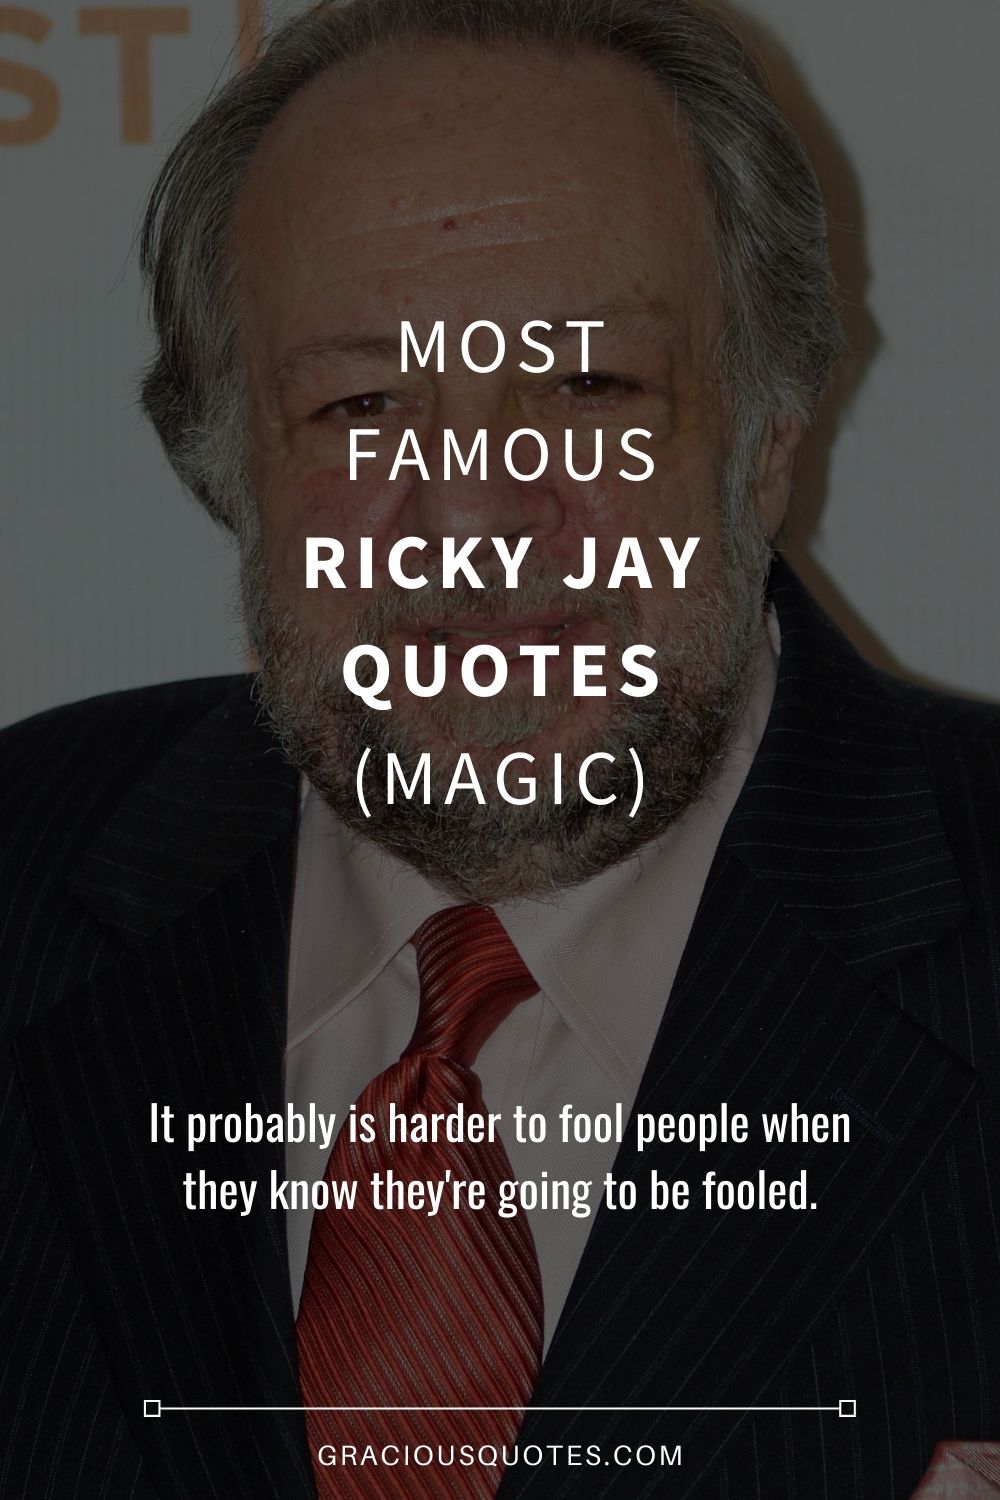 Most Famous Ricky Jay Quotes (MAGIC) - Gracious Quotes